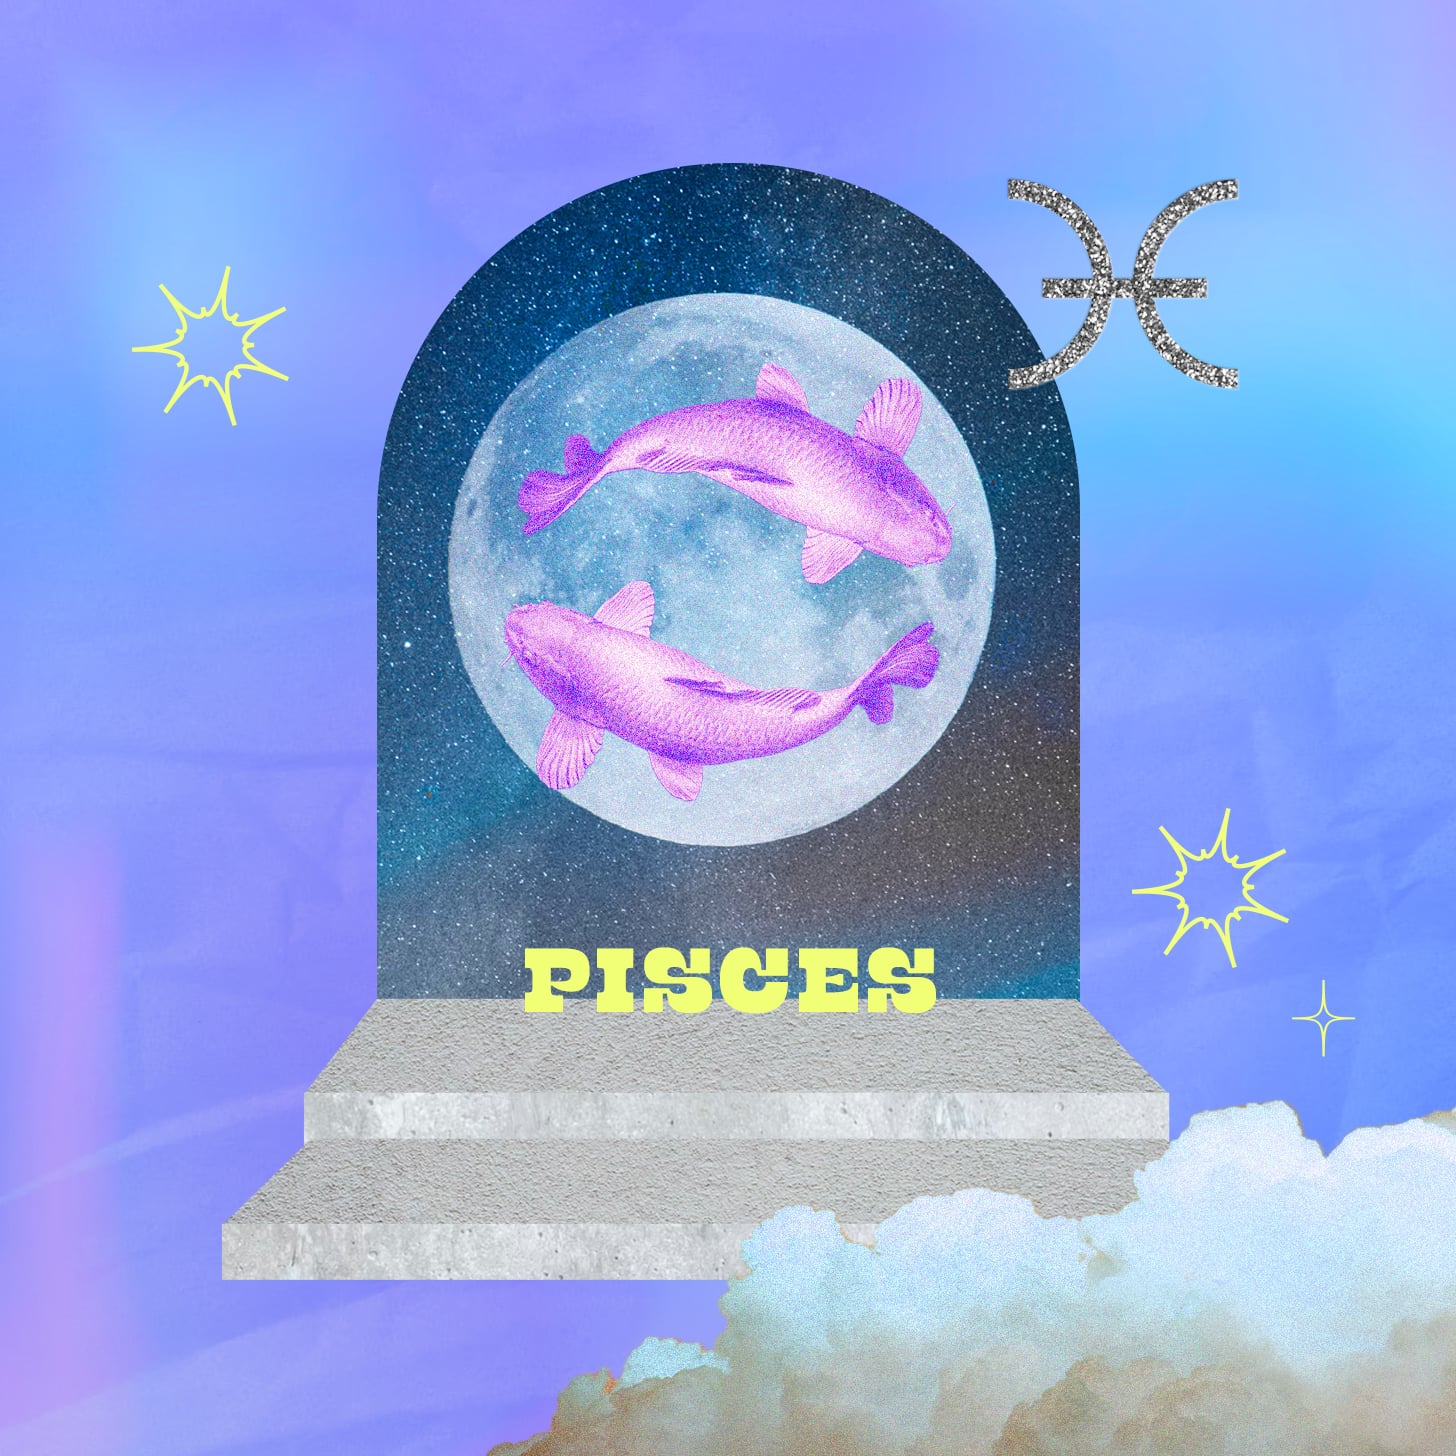 Pisces weekly horoscope for April 24, 2022